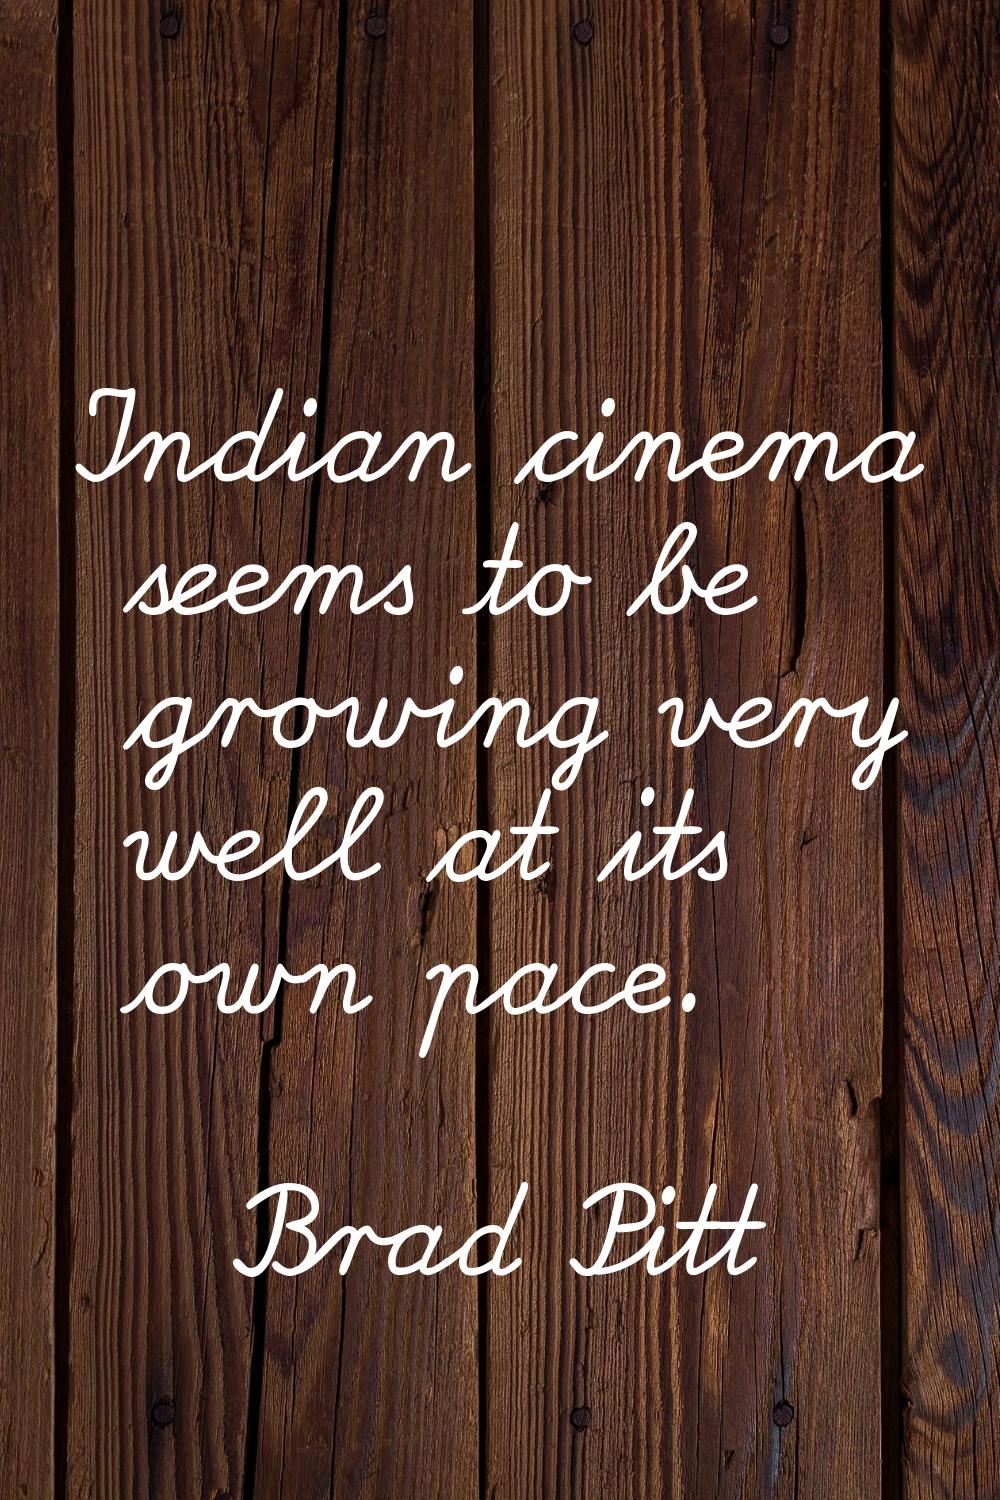 Indian cinema seems to be growing very well at its own pace.